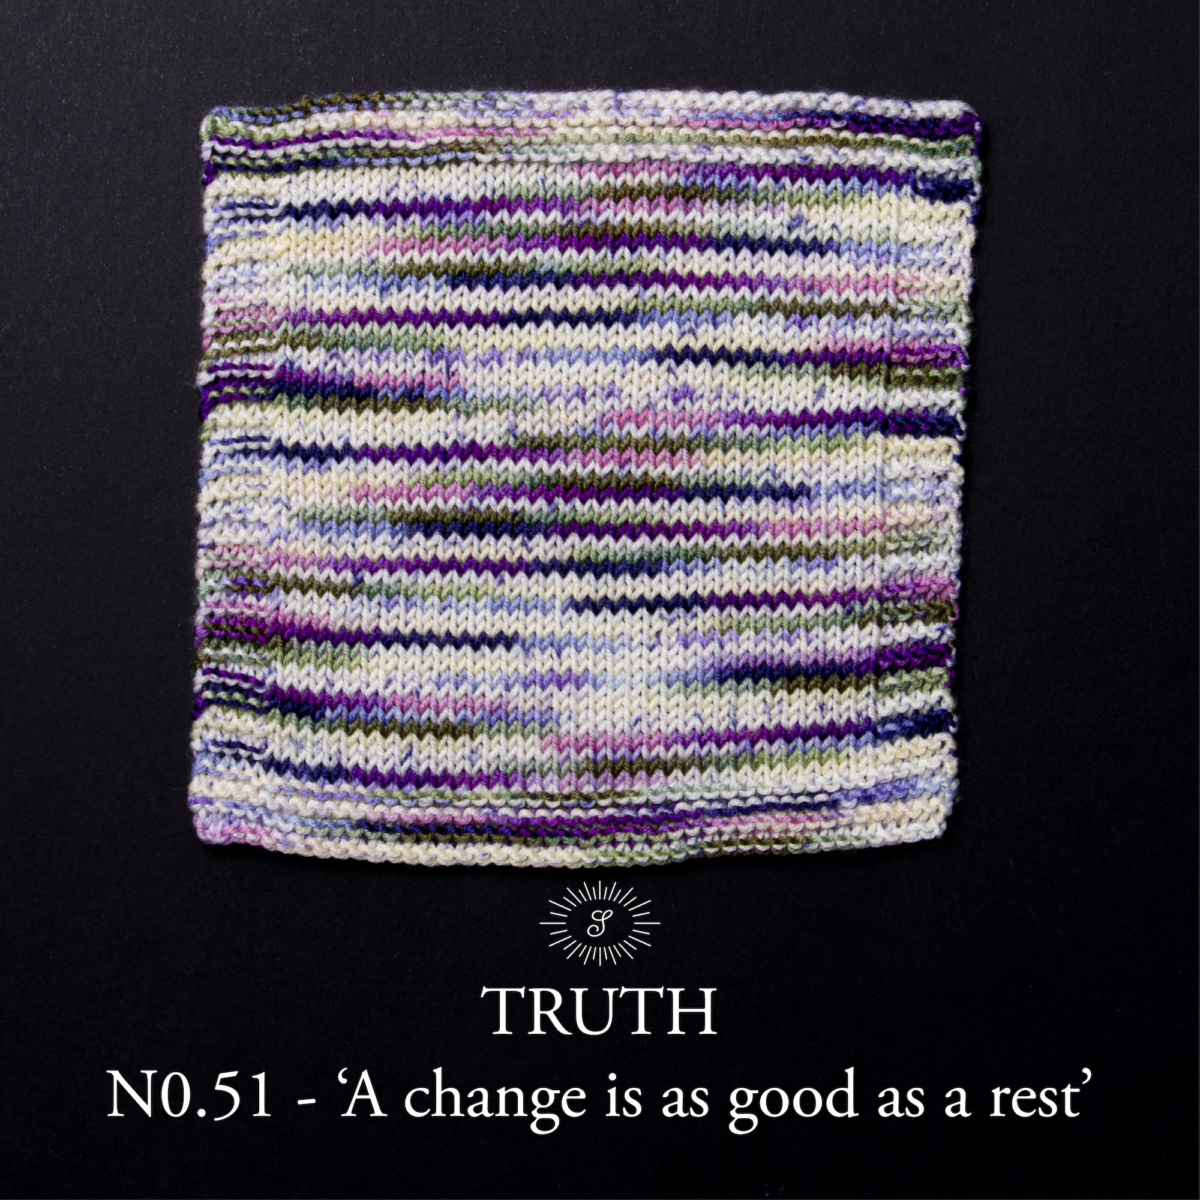 Truth 051 swatch